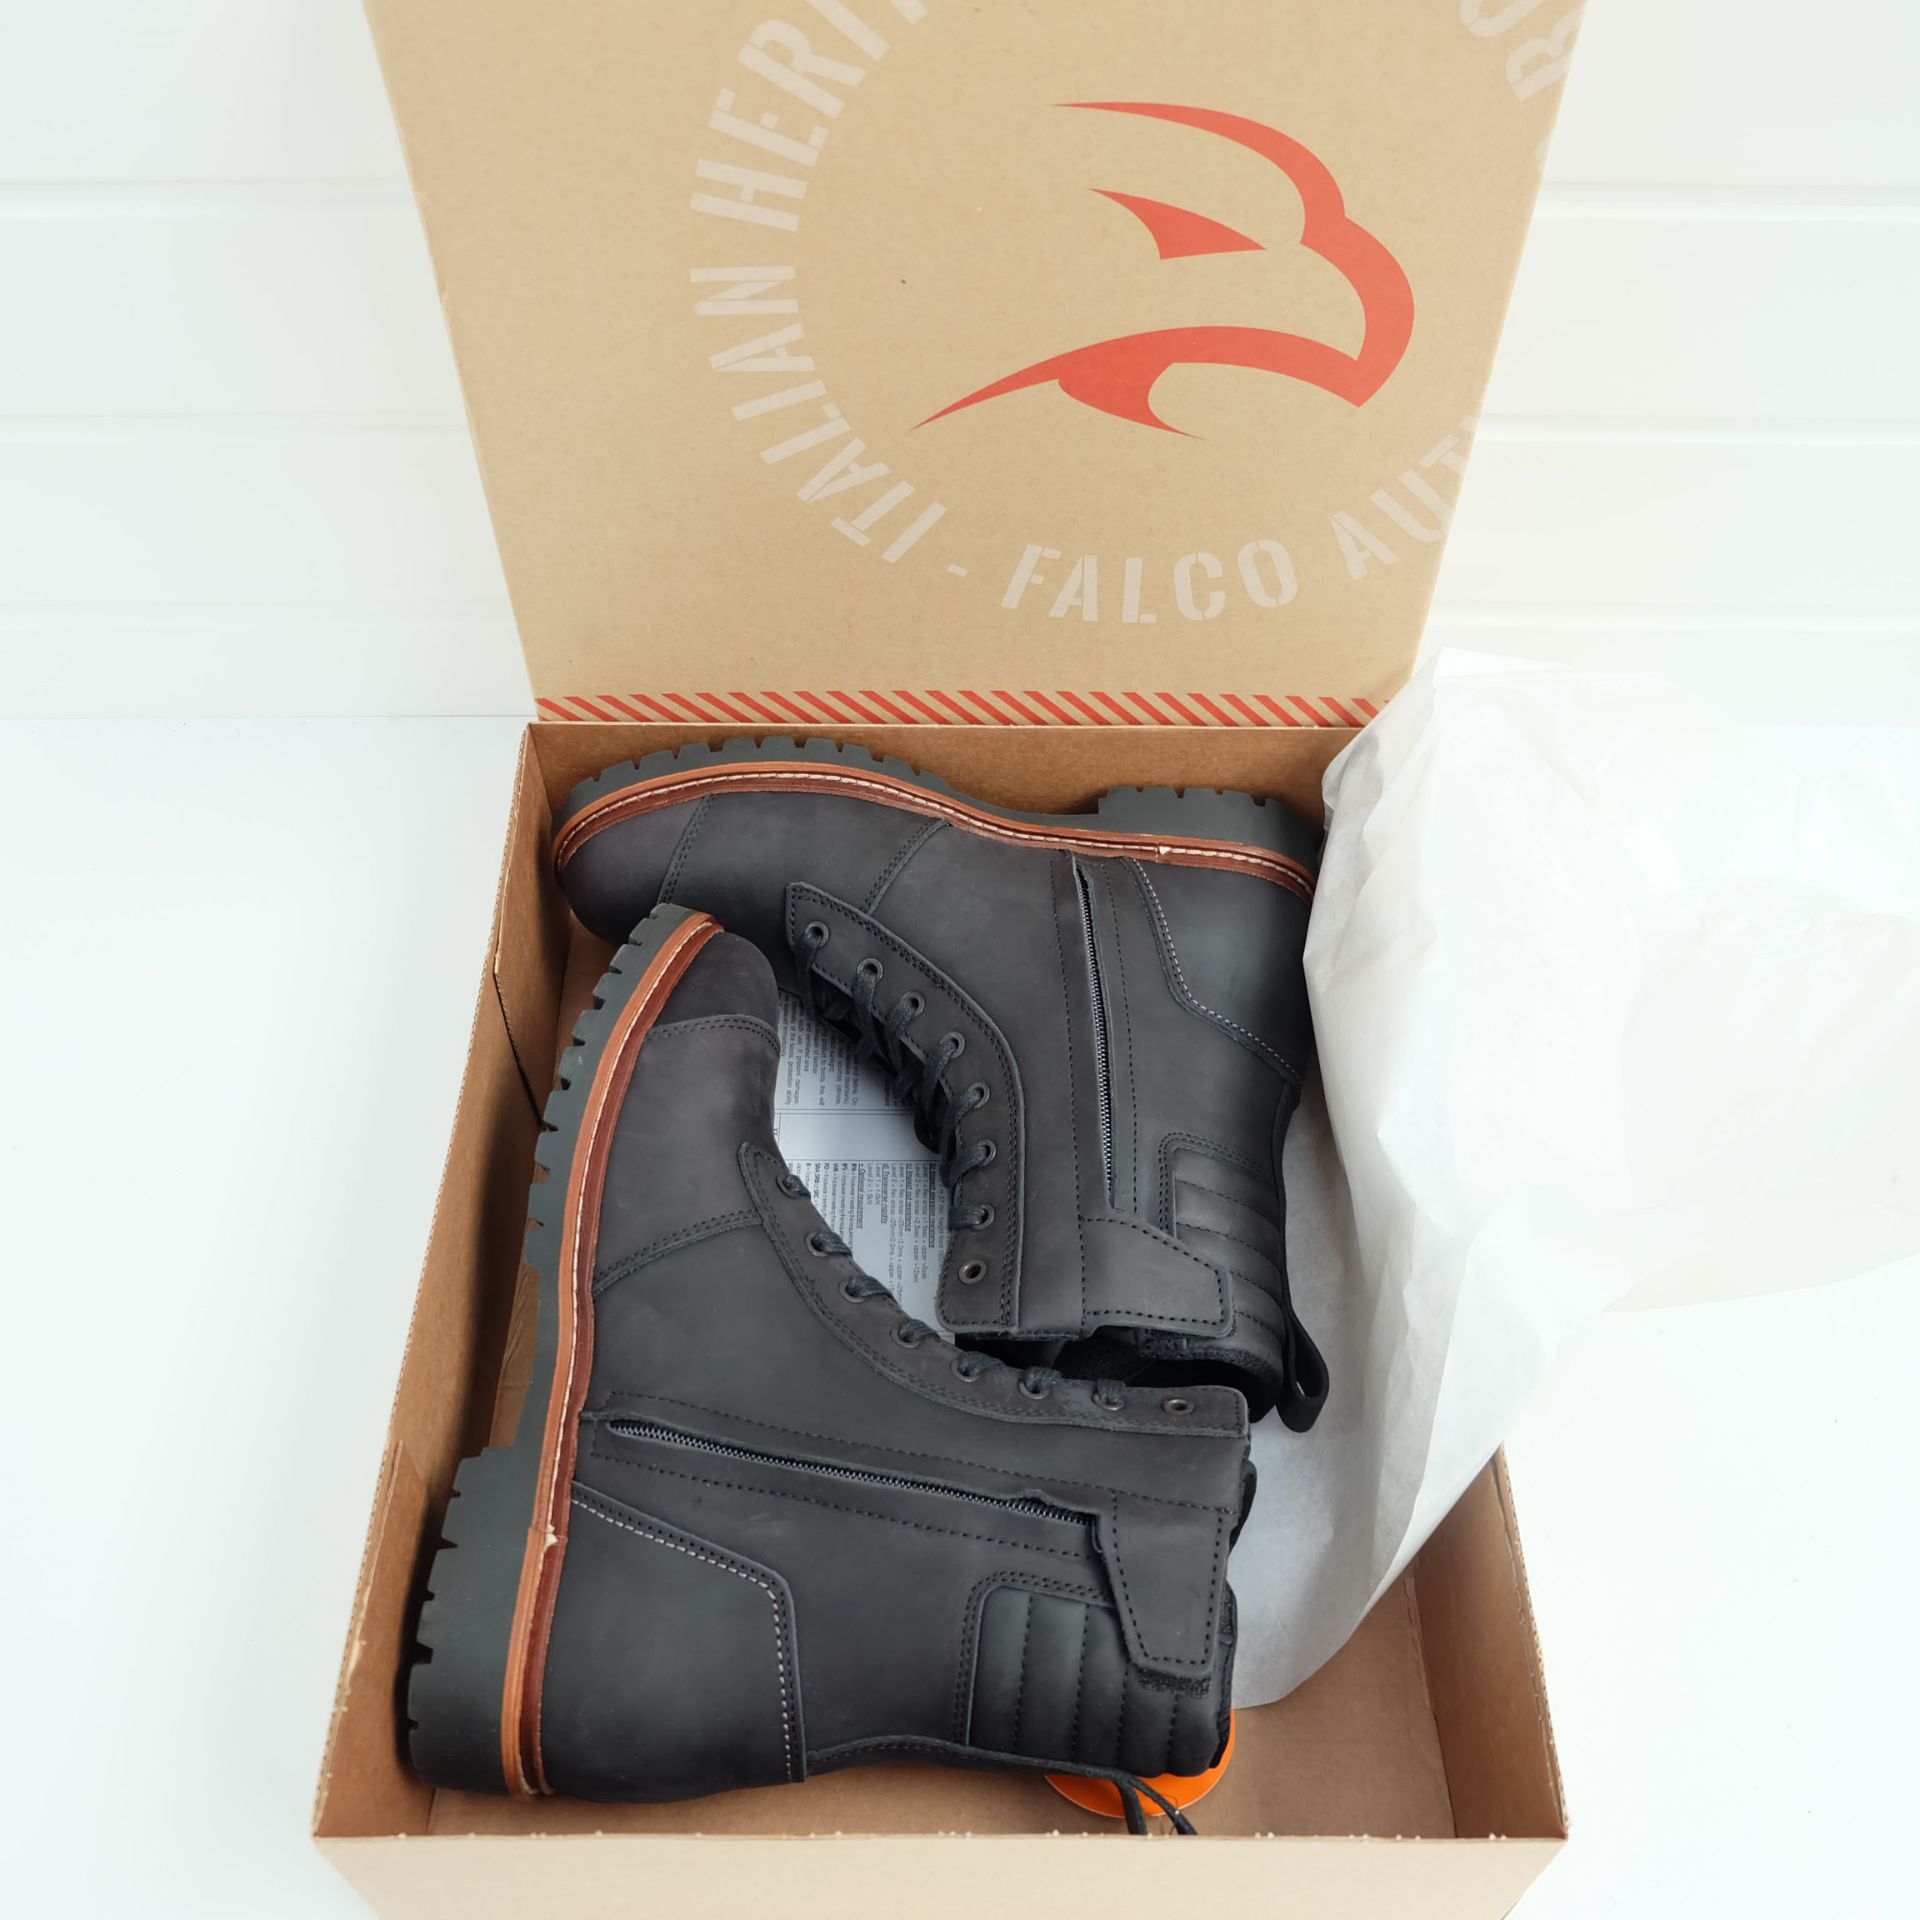 Falco Rooster Leather Waterproof Short Boots 41/UK7.5. Black